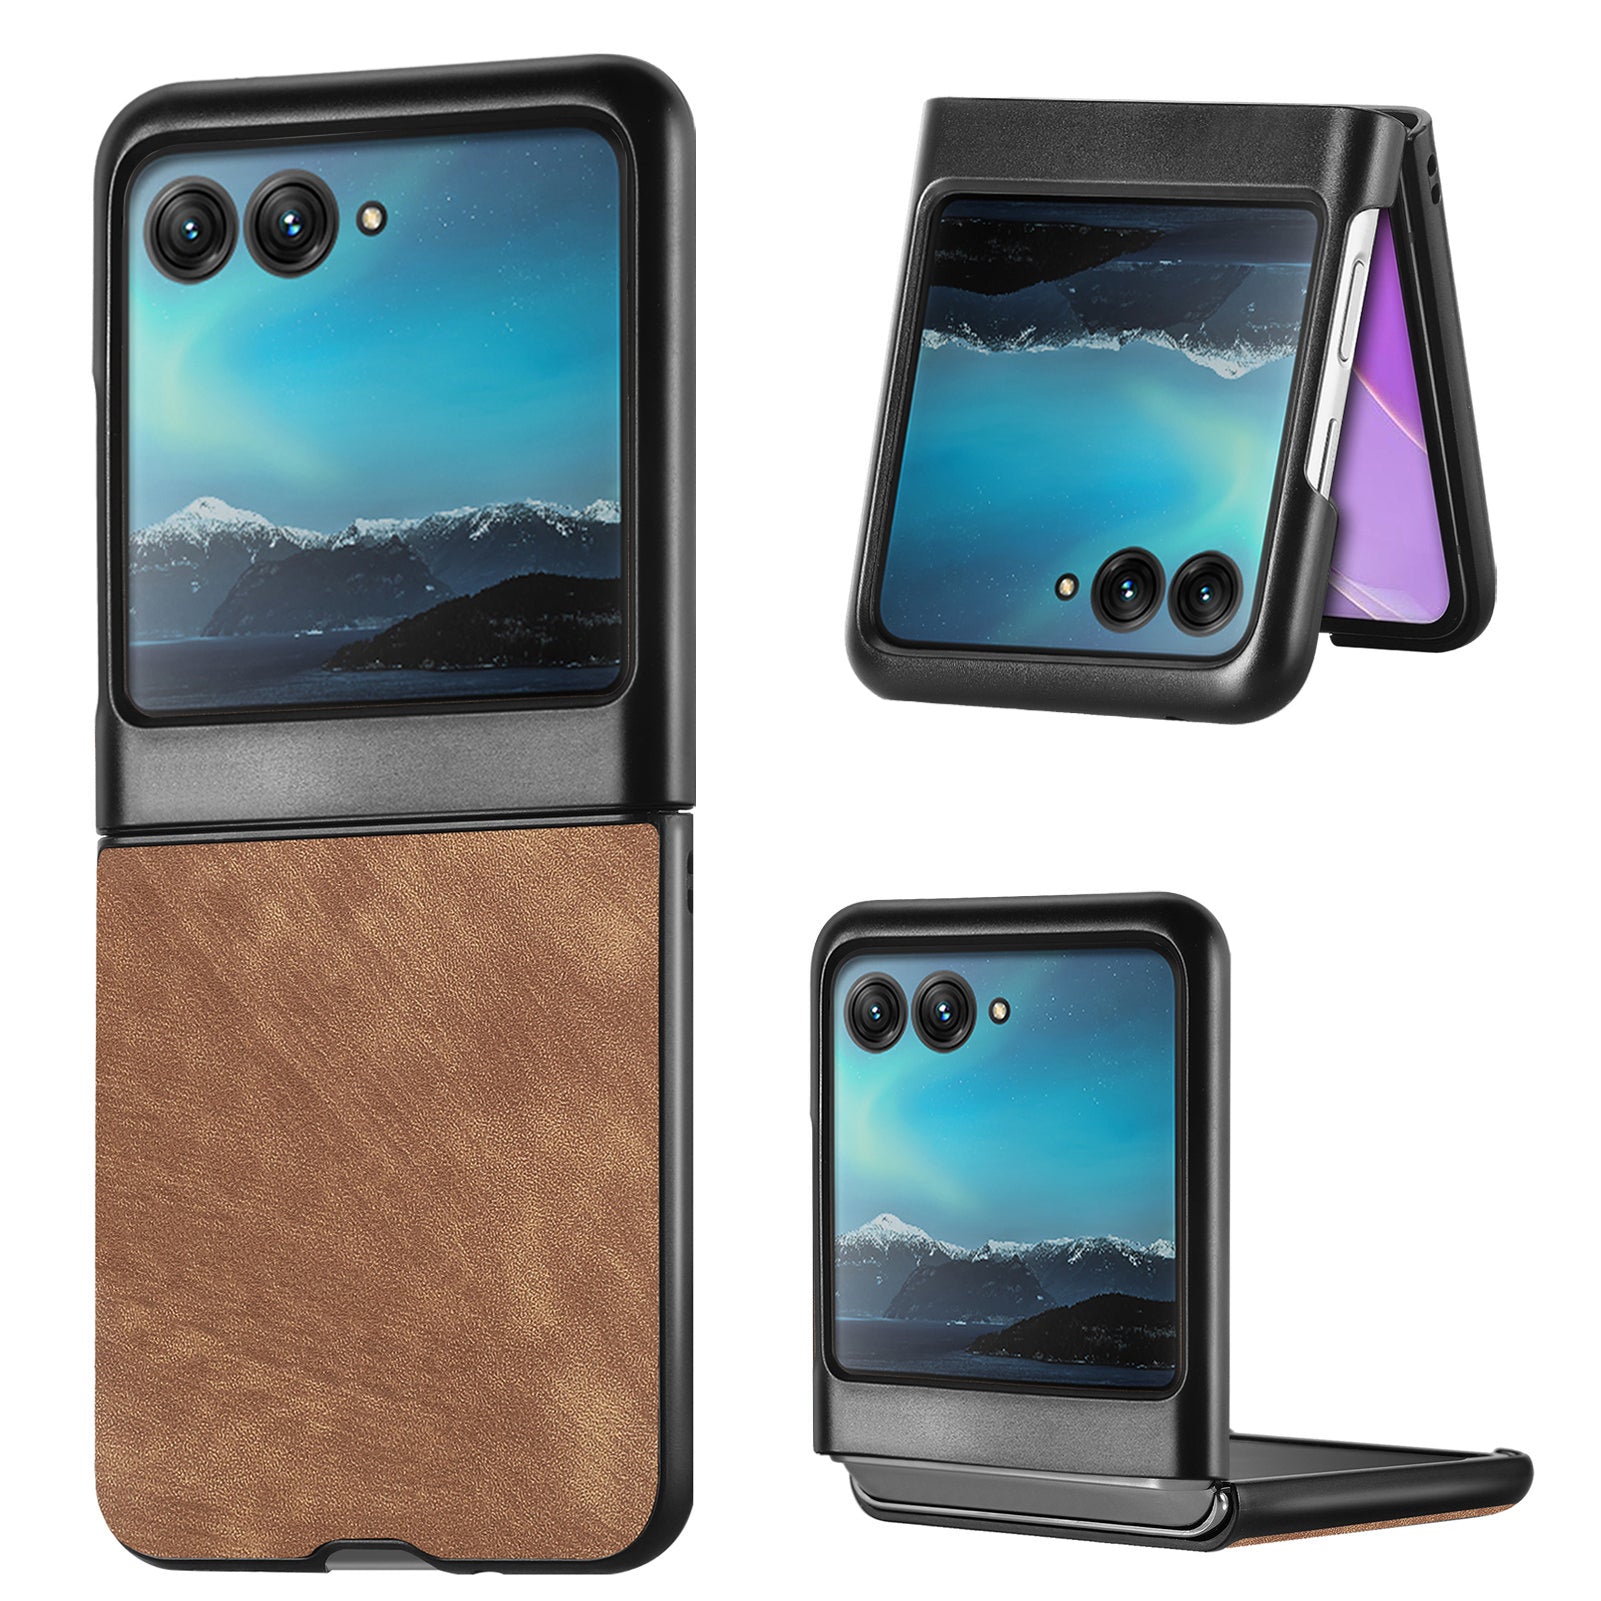 Uniqkart for Motorola Razr 40 Ultra 5G Skin-Touch Phone Case PU Leather Coated PC Case Protective Slim Cover - Brown